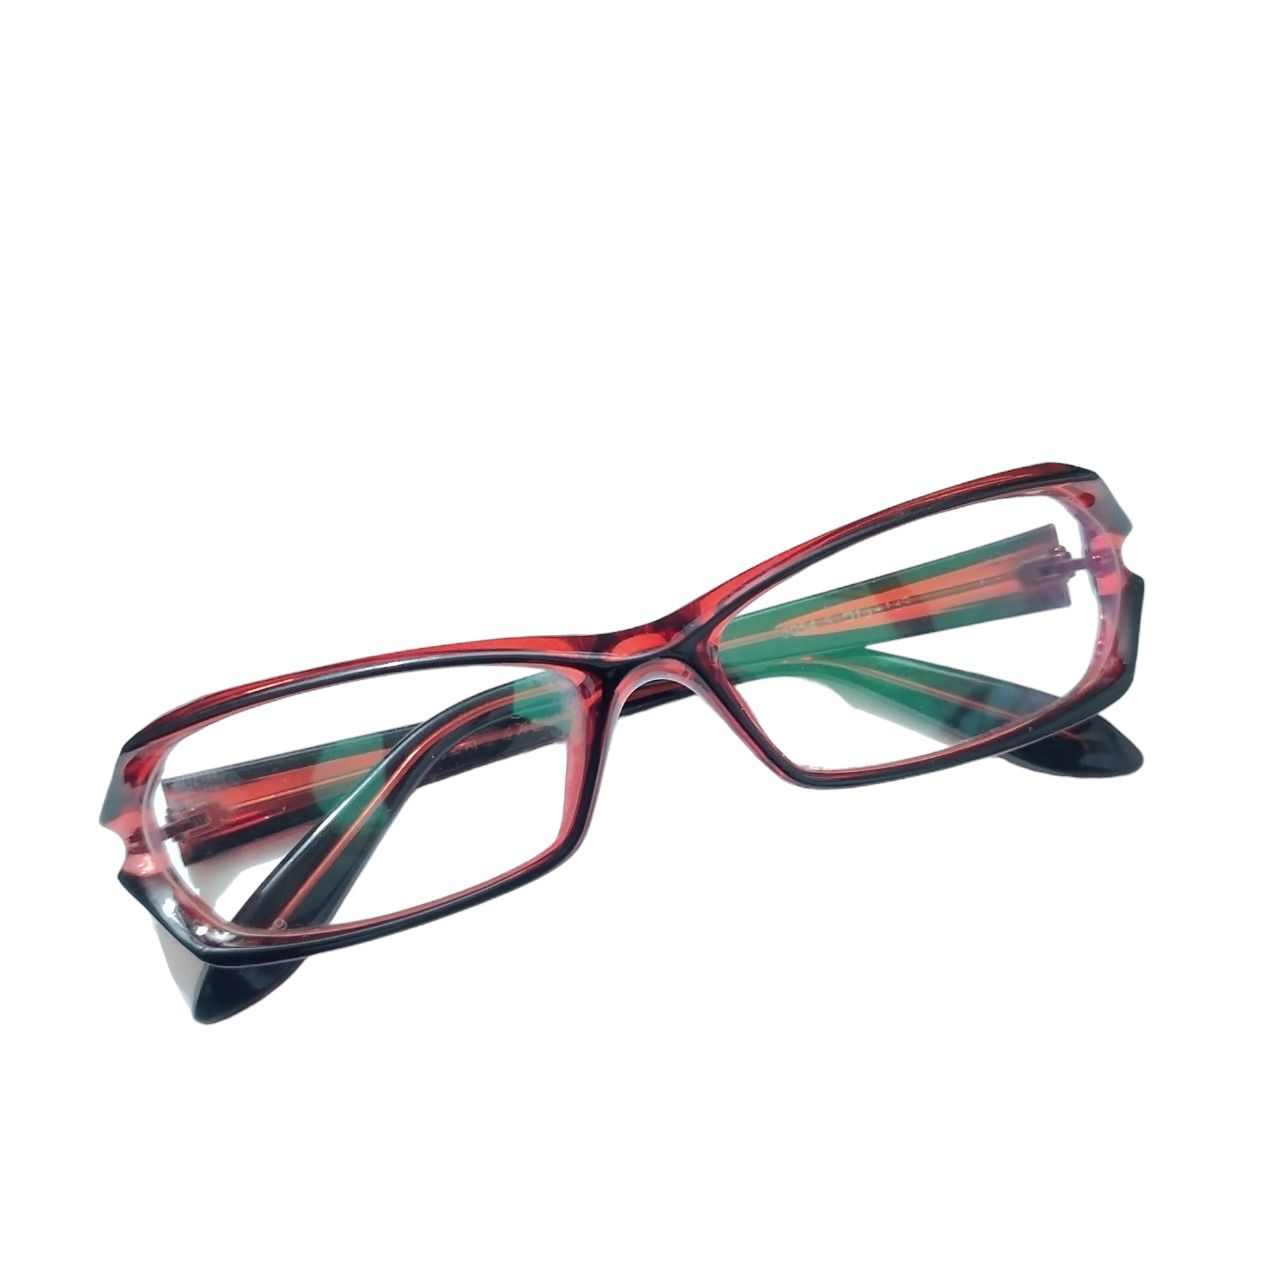 Red Computer Glasses with Anti Glare Coating 8054Rd